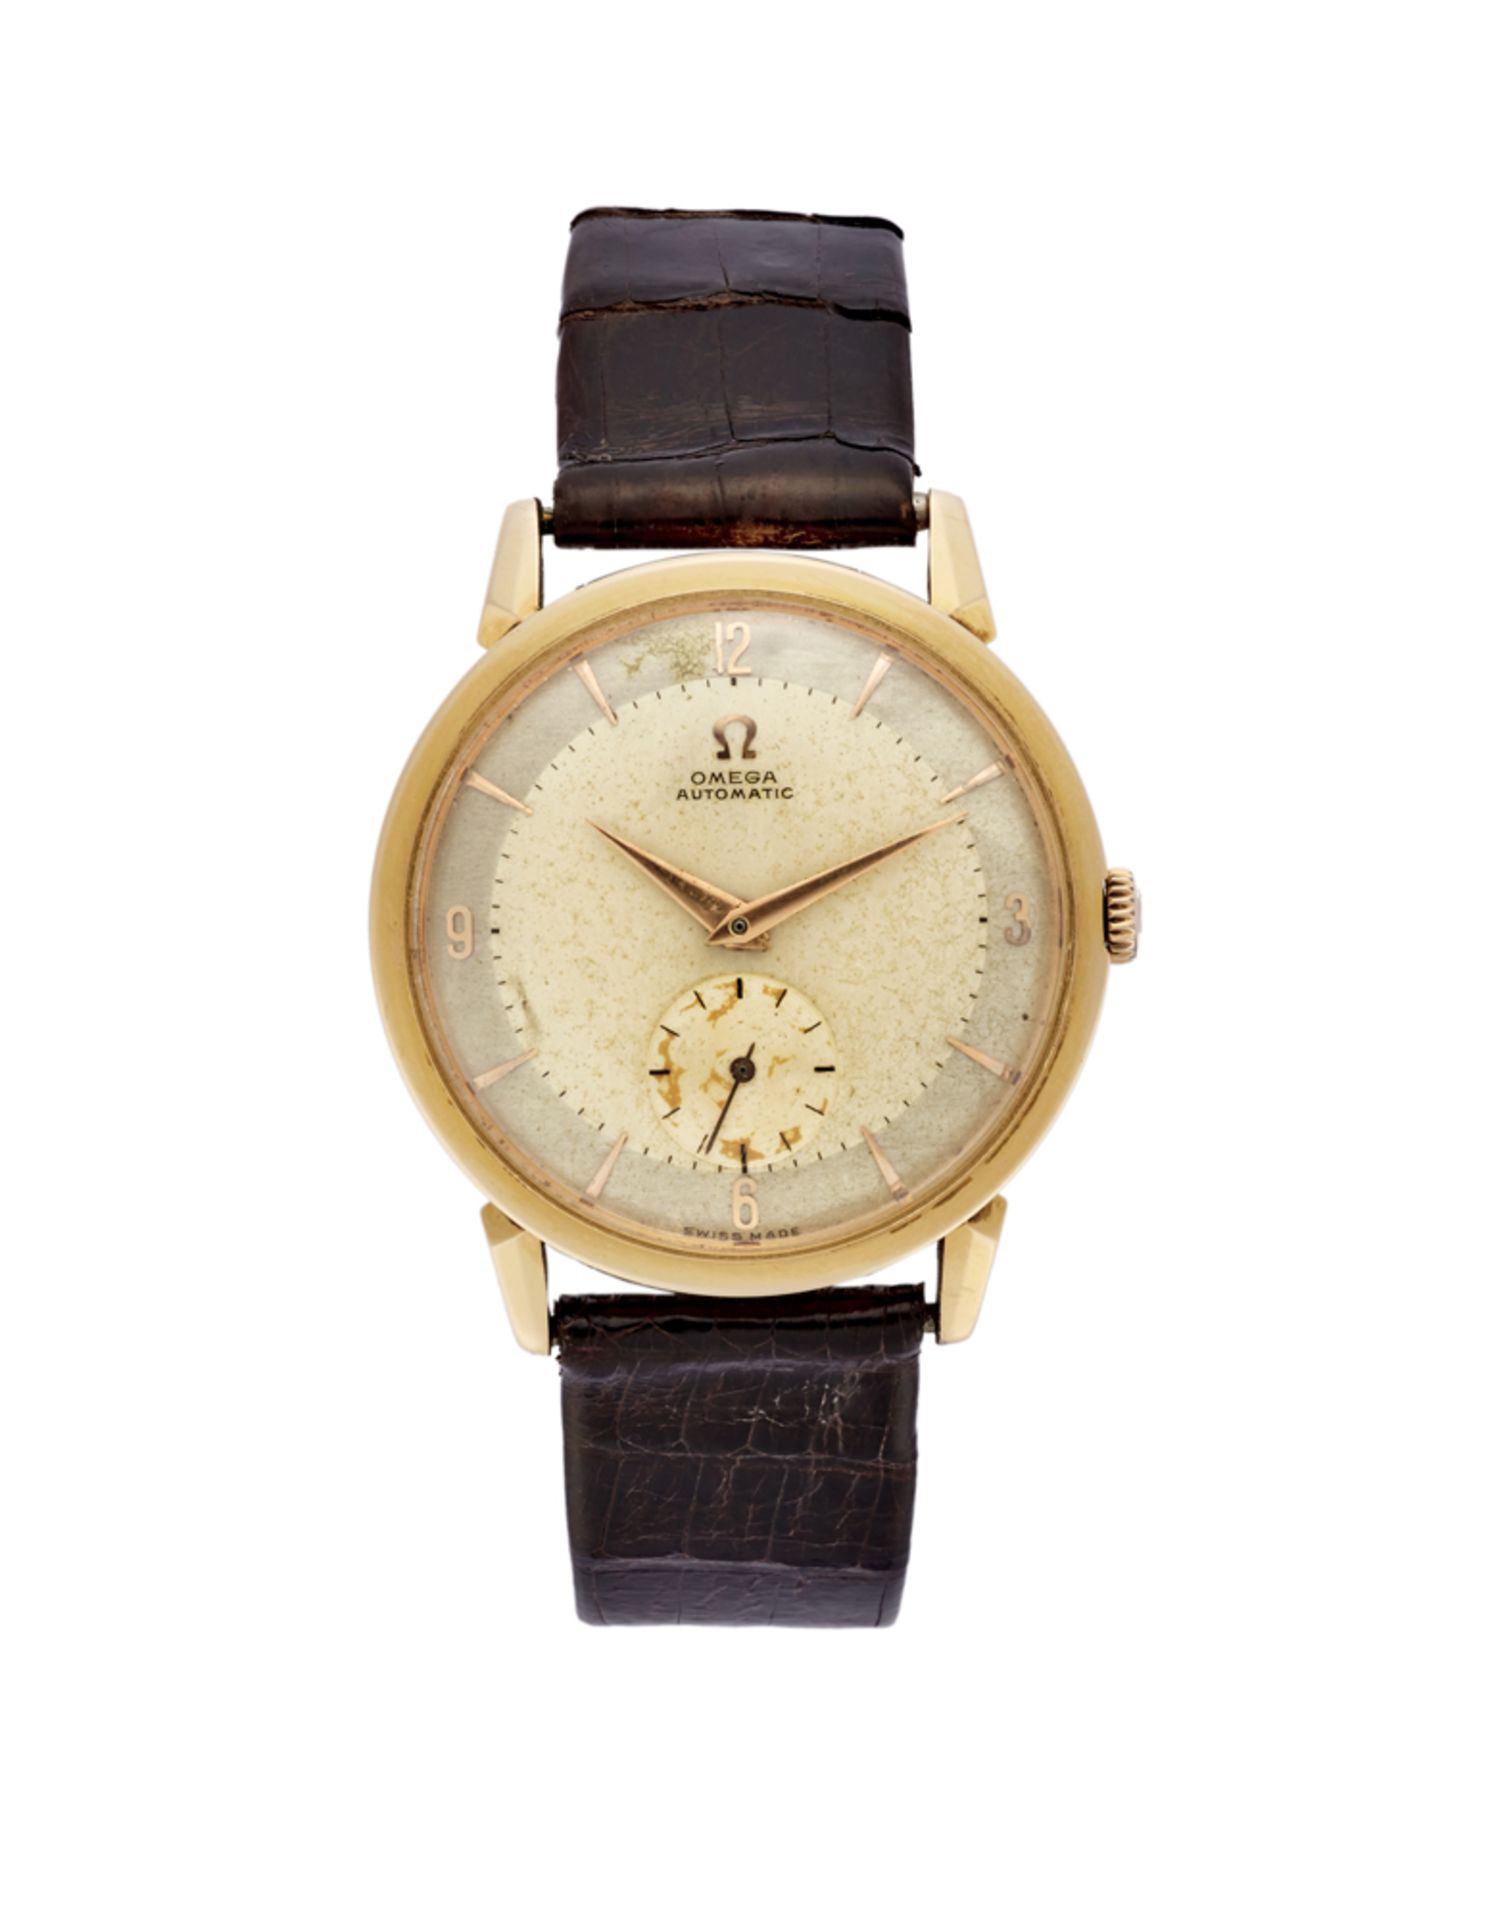 OMEGA<br>Gent's 18K gold wristwatch<br>1950s<br>Dial, movement and case signed<br>Automatic movement